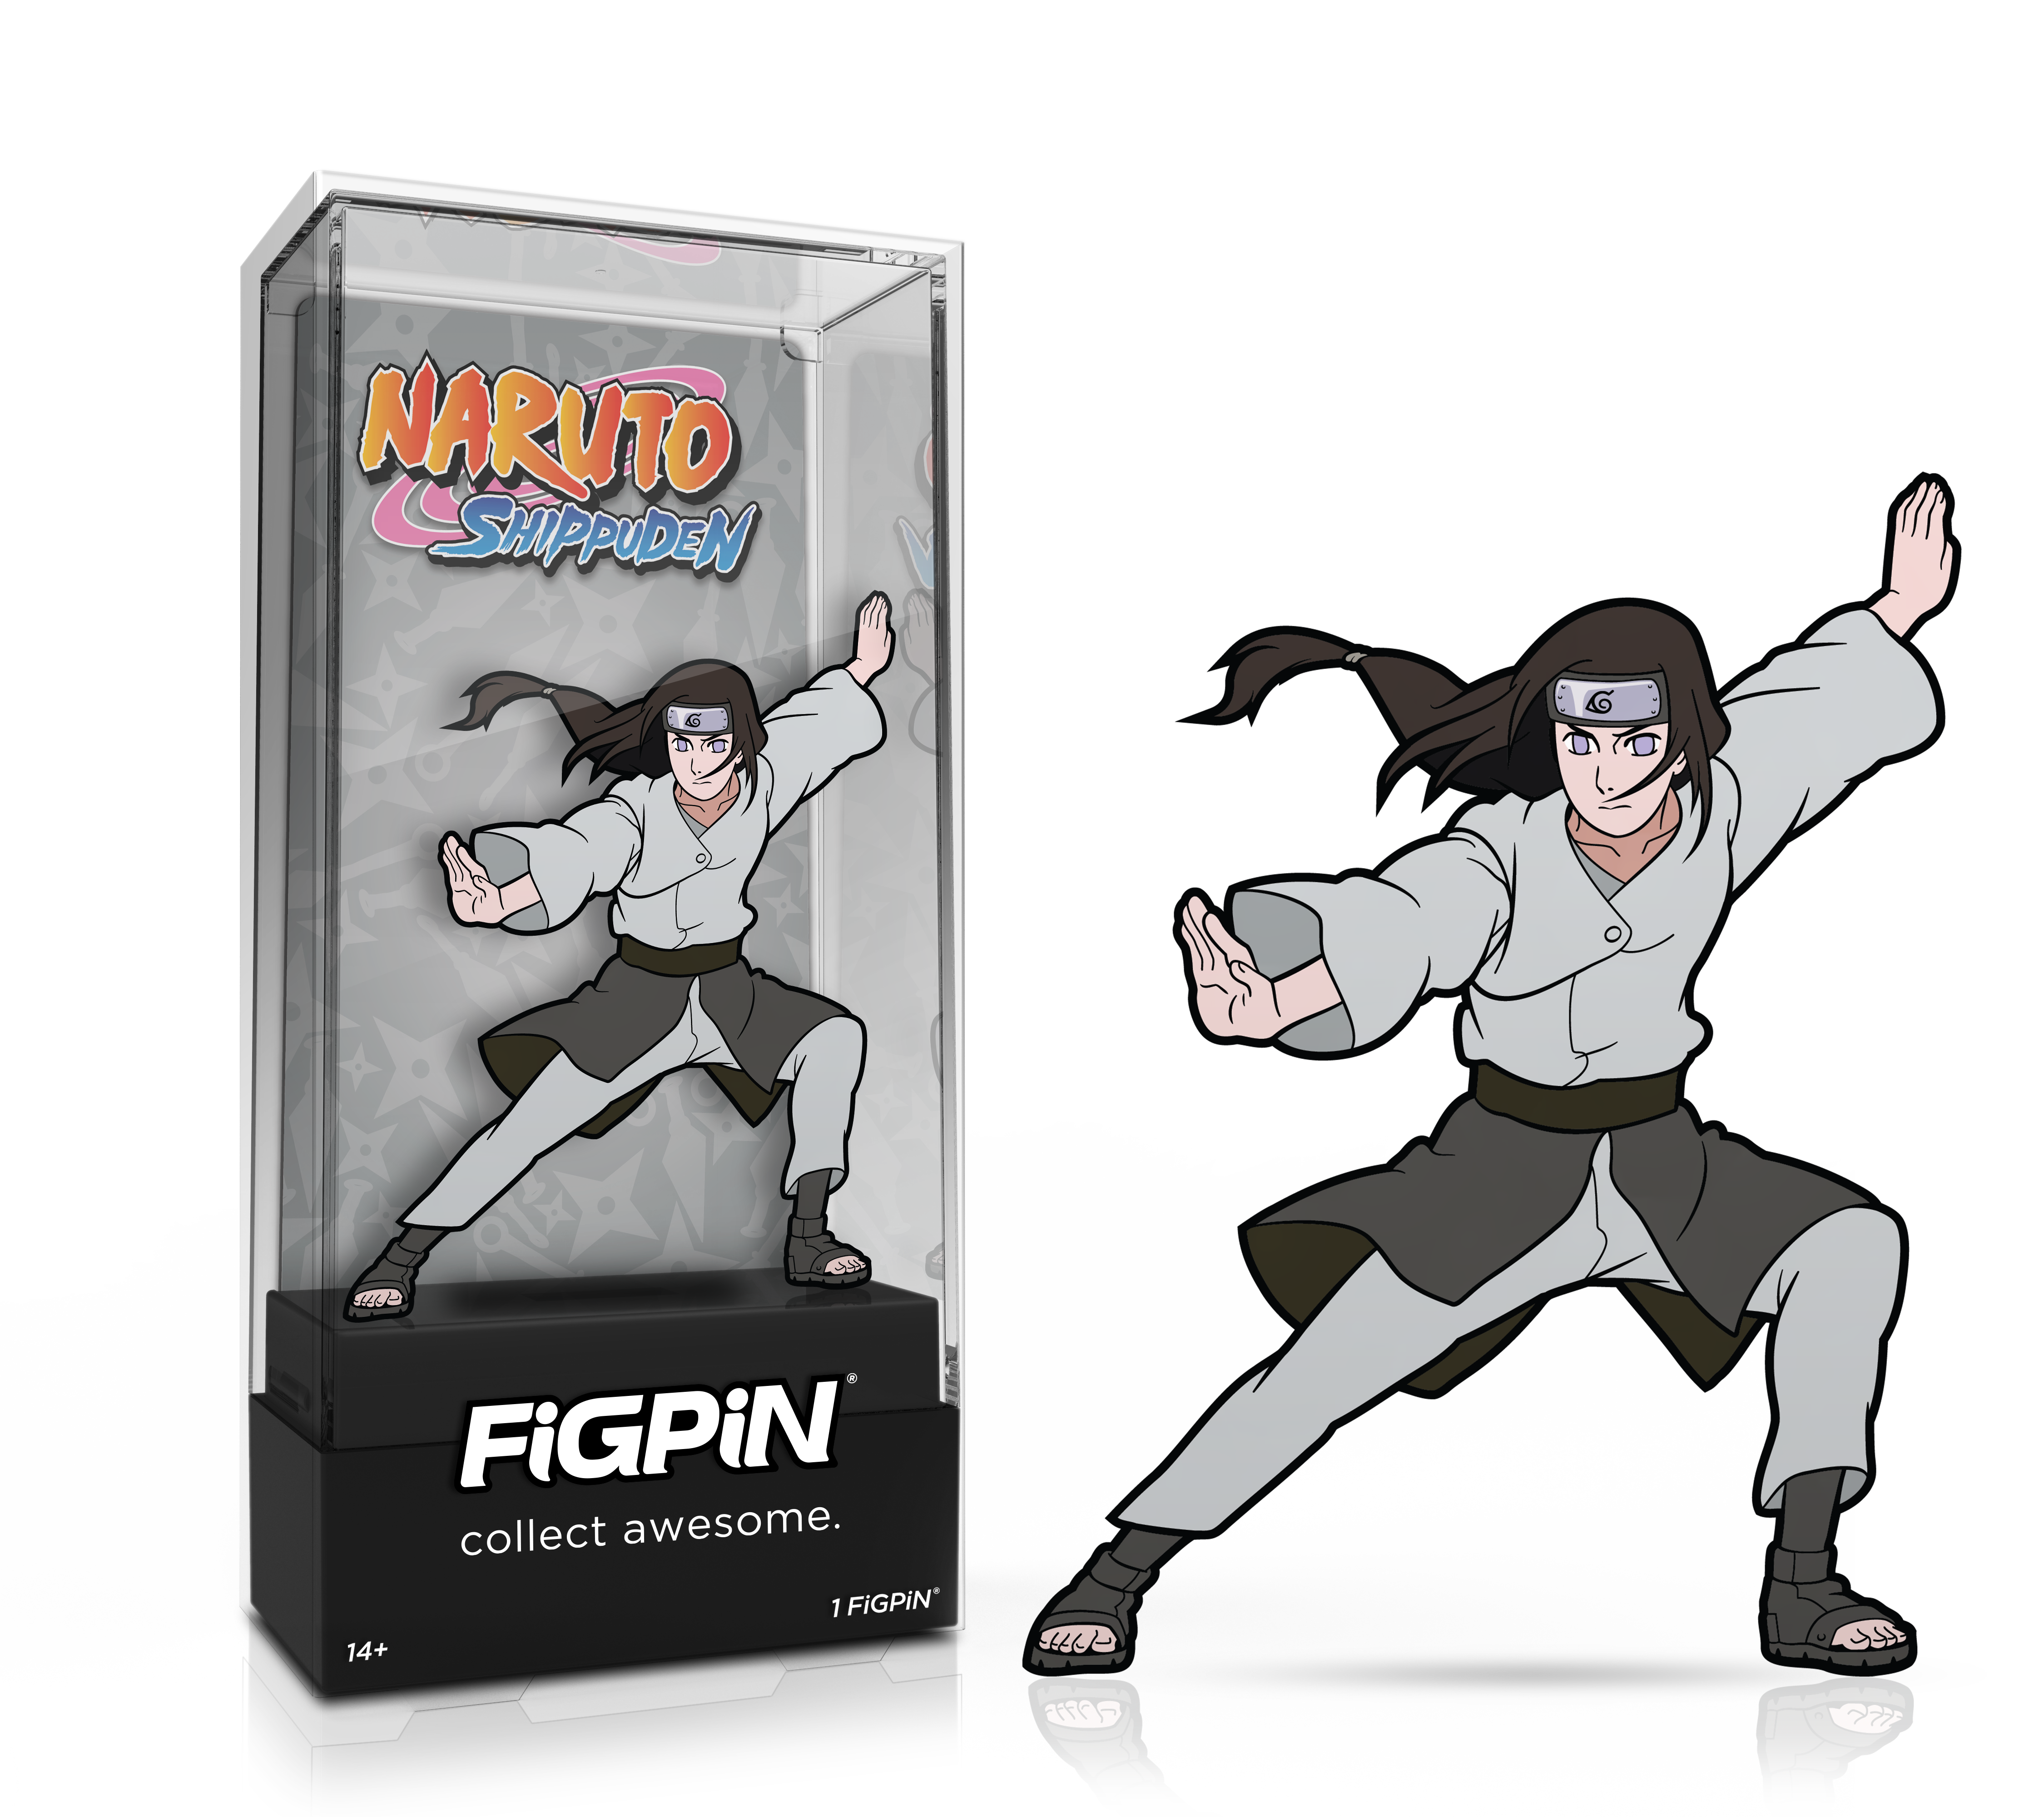 Side by side view of Naruto Shippuden's Neji enamel pin in display case and the art render.